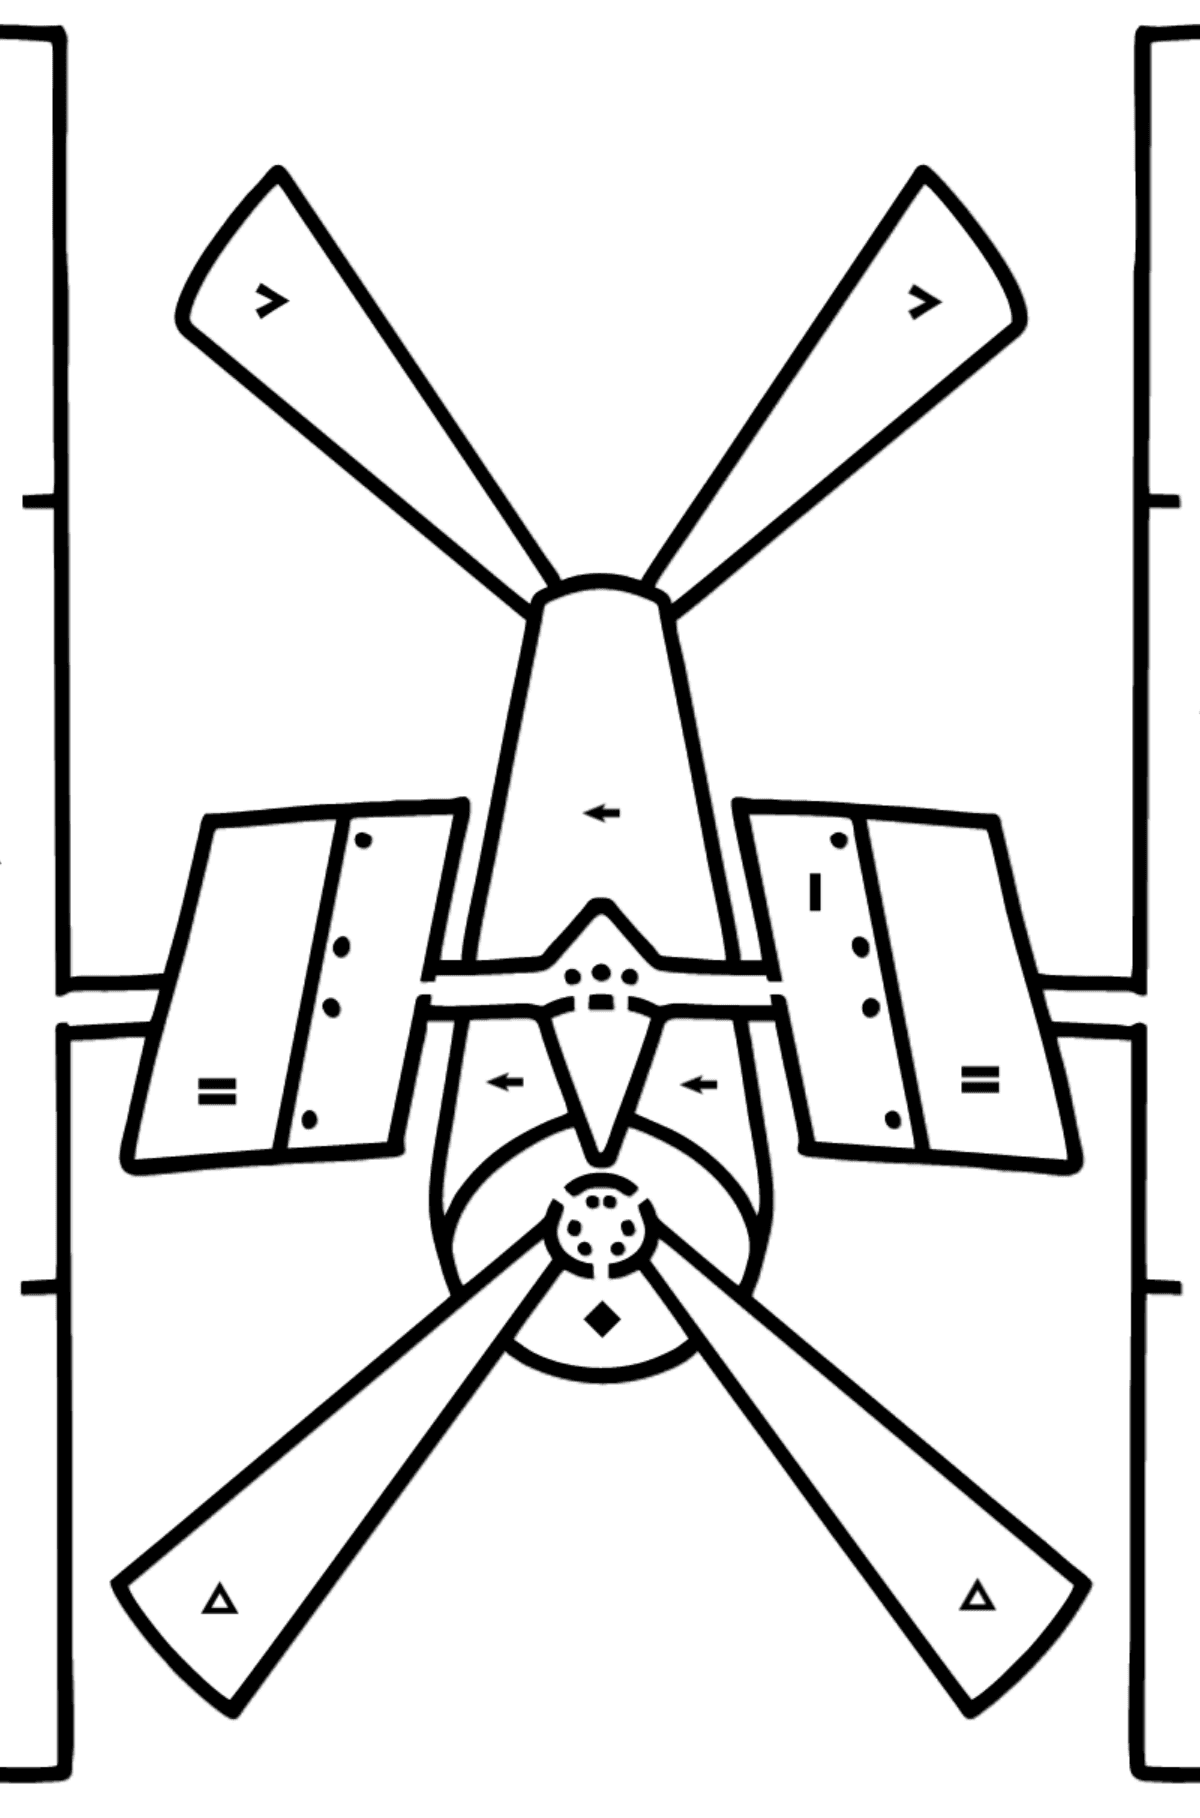 Space Station coloring page - Coloring by Symbols for Kids